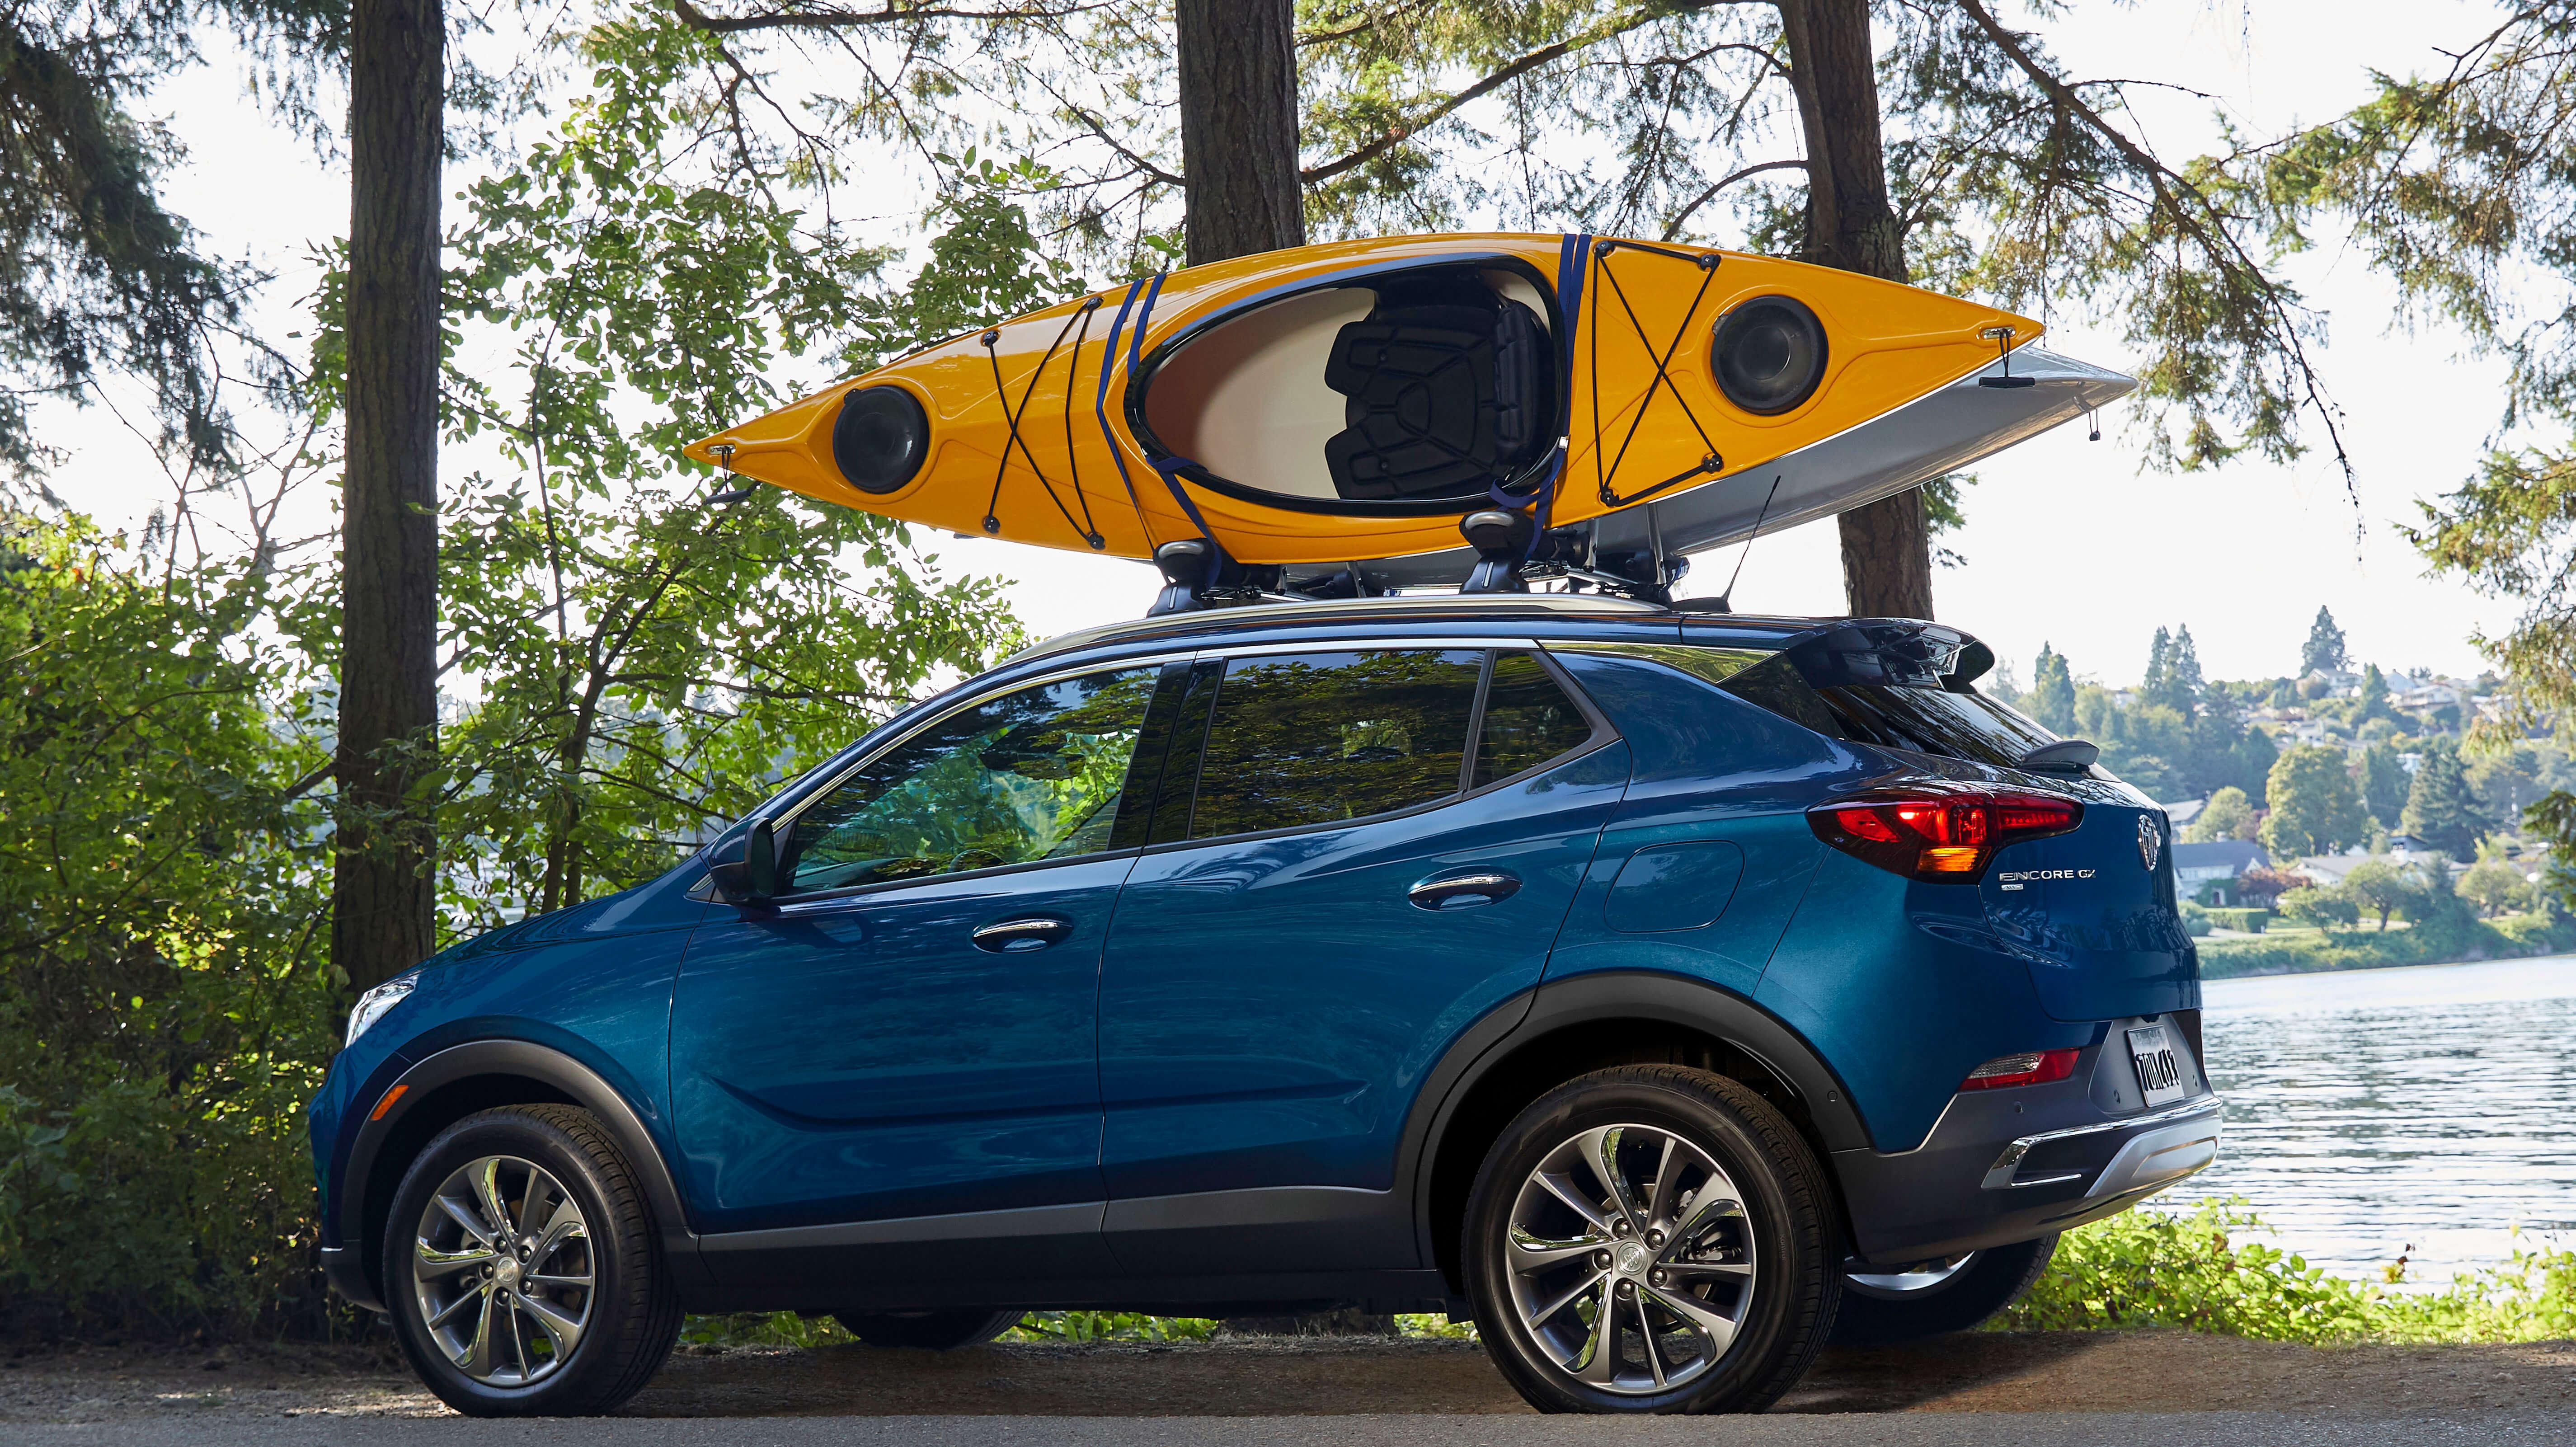 A Buick SUV with a kayak is parked near a lake.